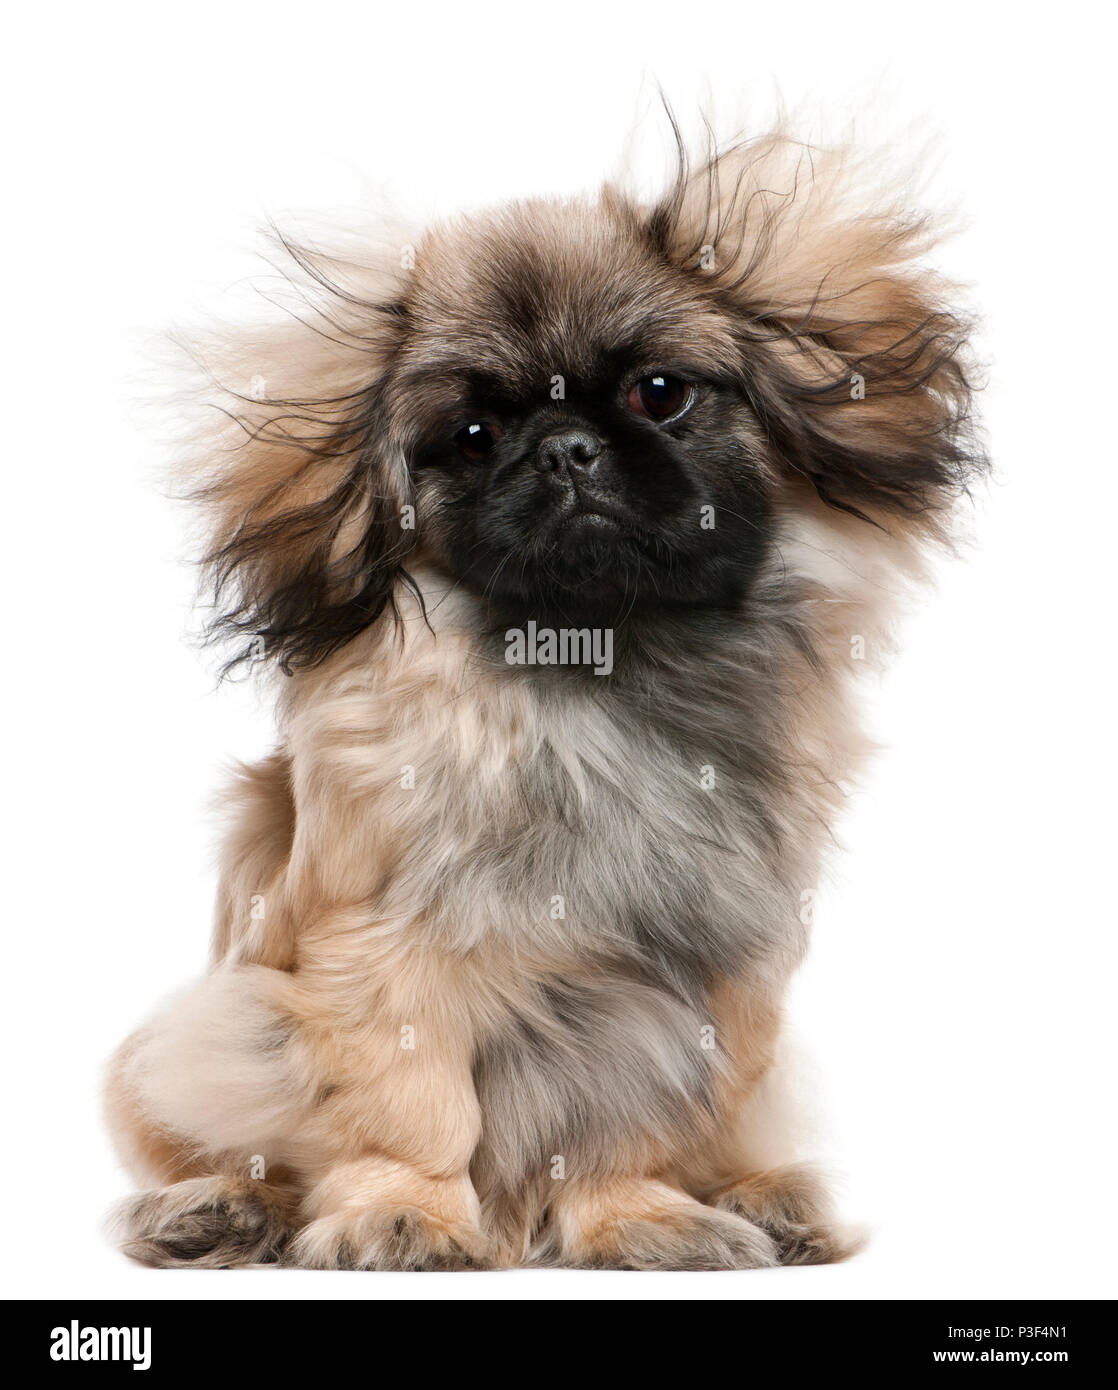 Pekingese puppy with windblown hair, 6 months old, sitting in front of white background Stock Photo